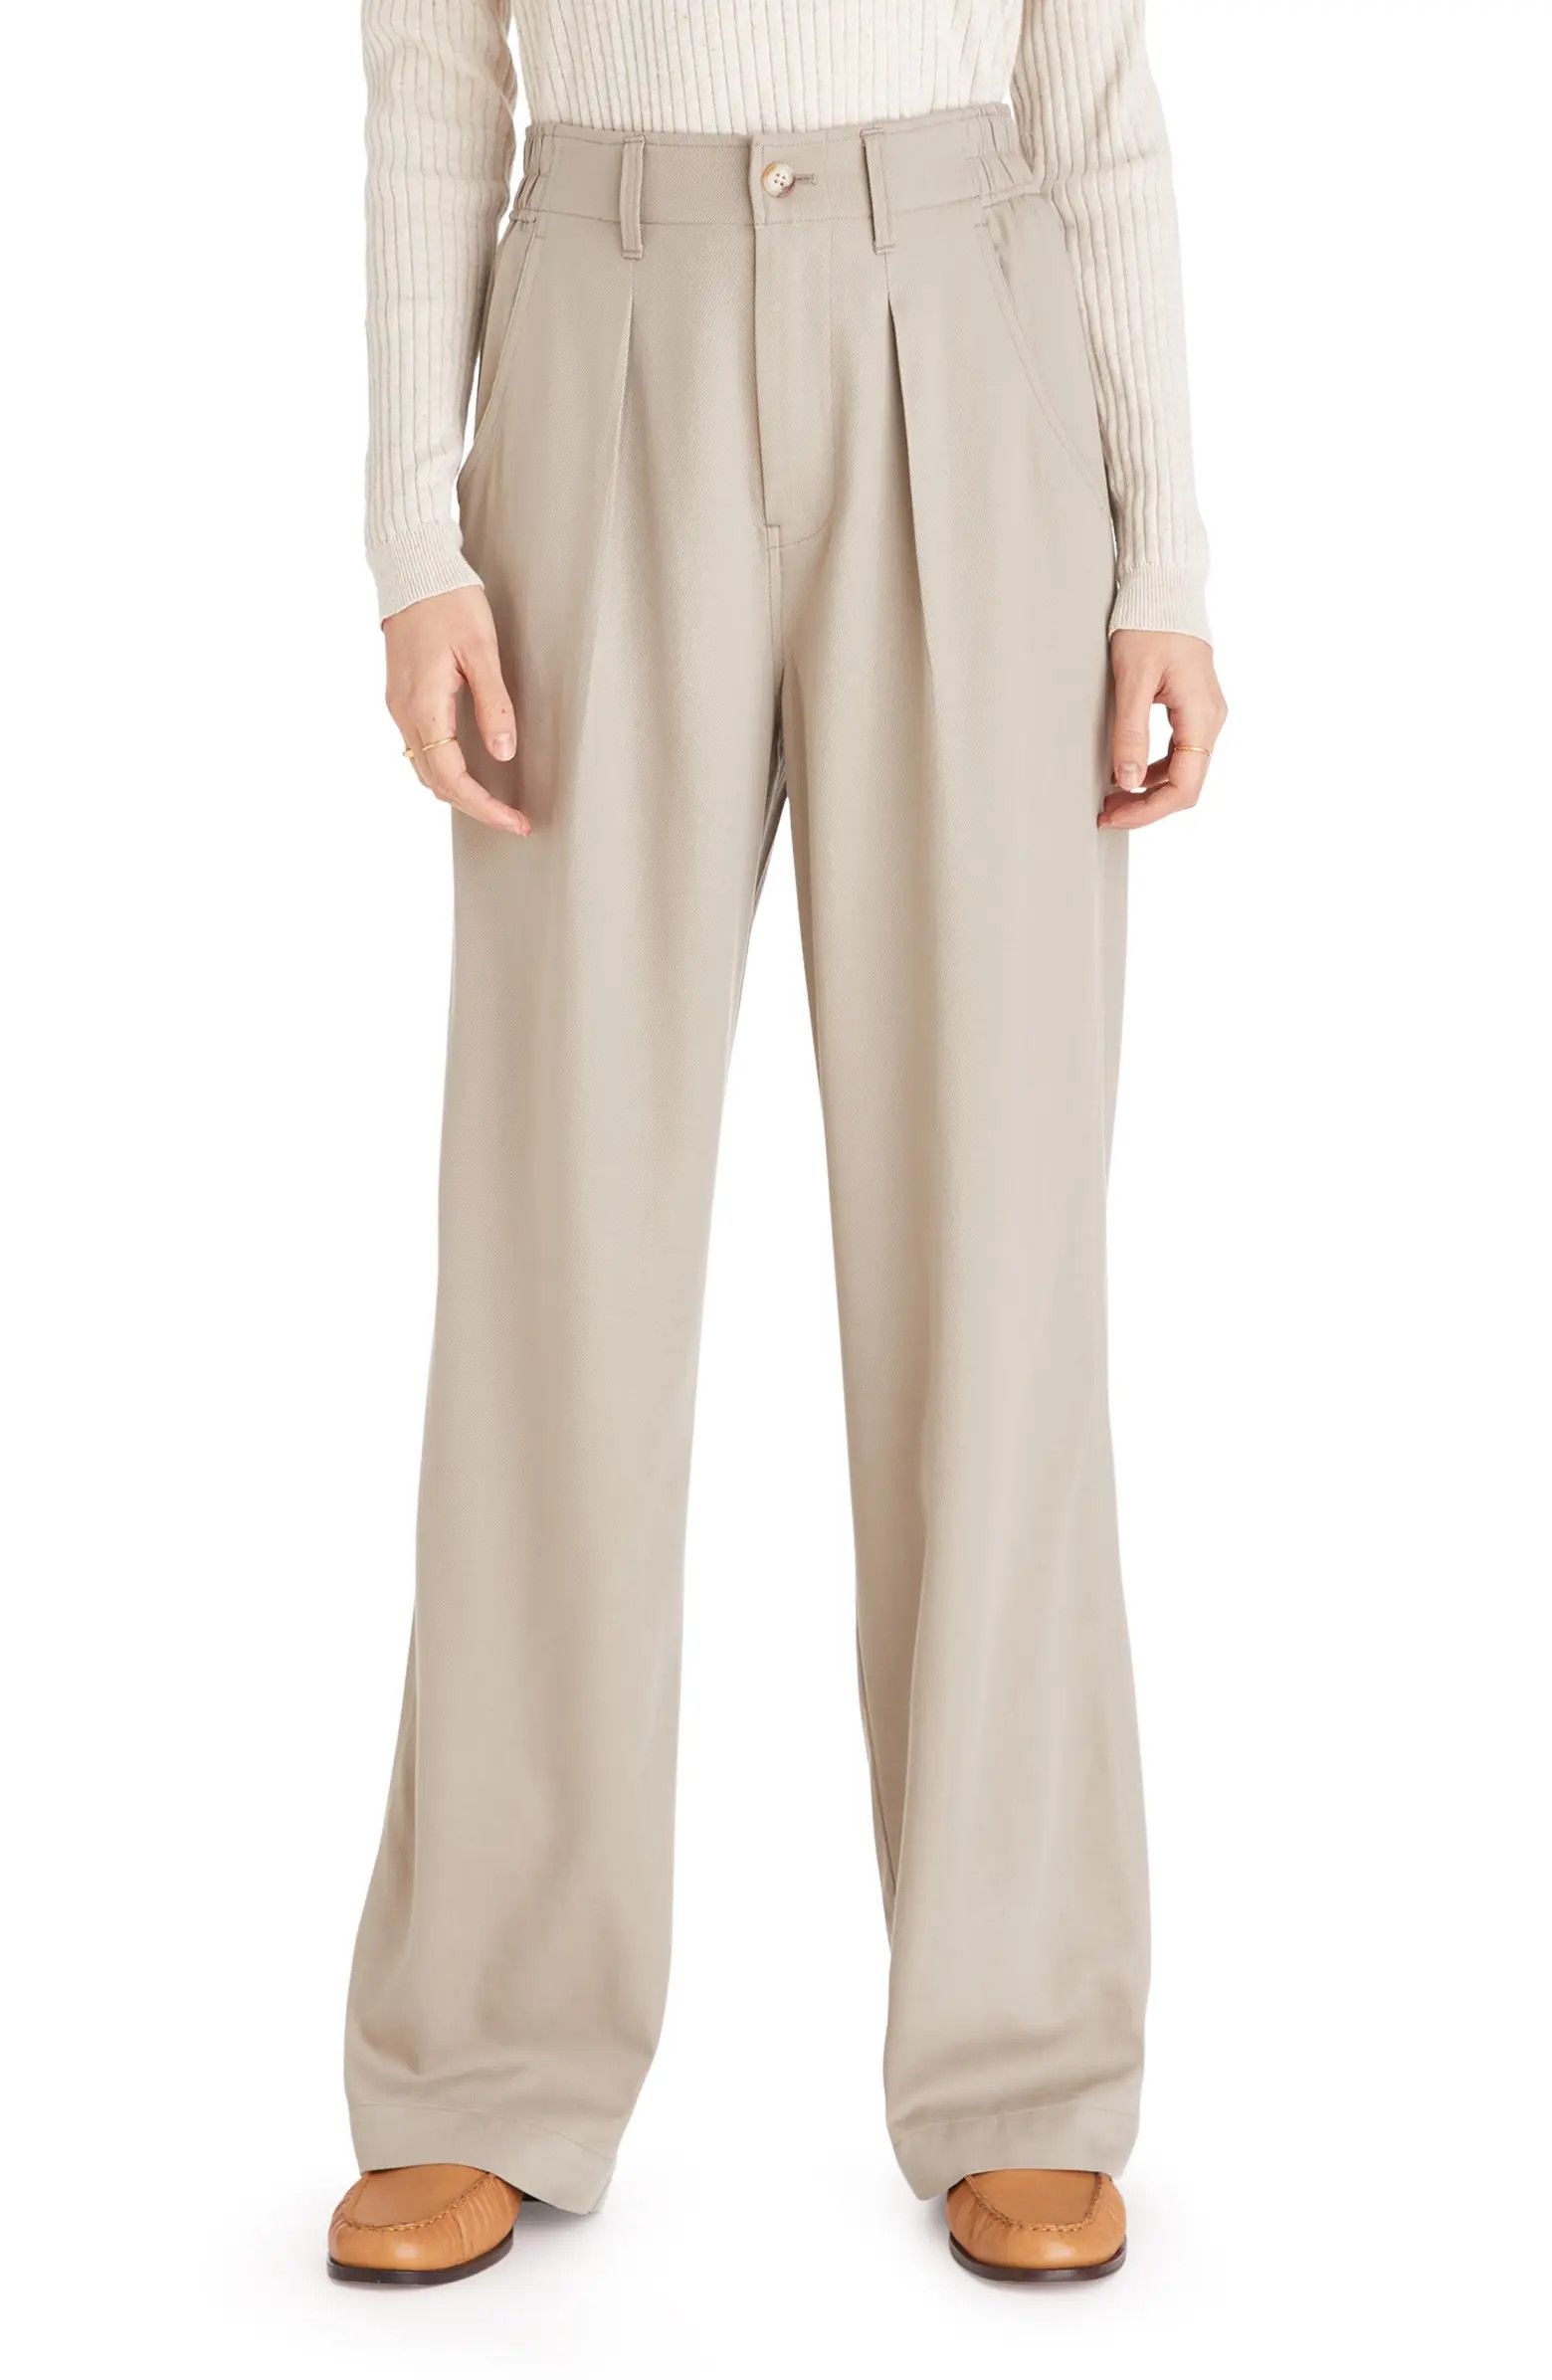 Madewell Lanie Pleat Front Straight Leg Pants | Nordstrom | Nordstrom